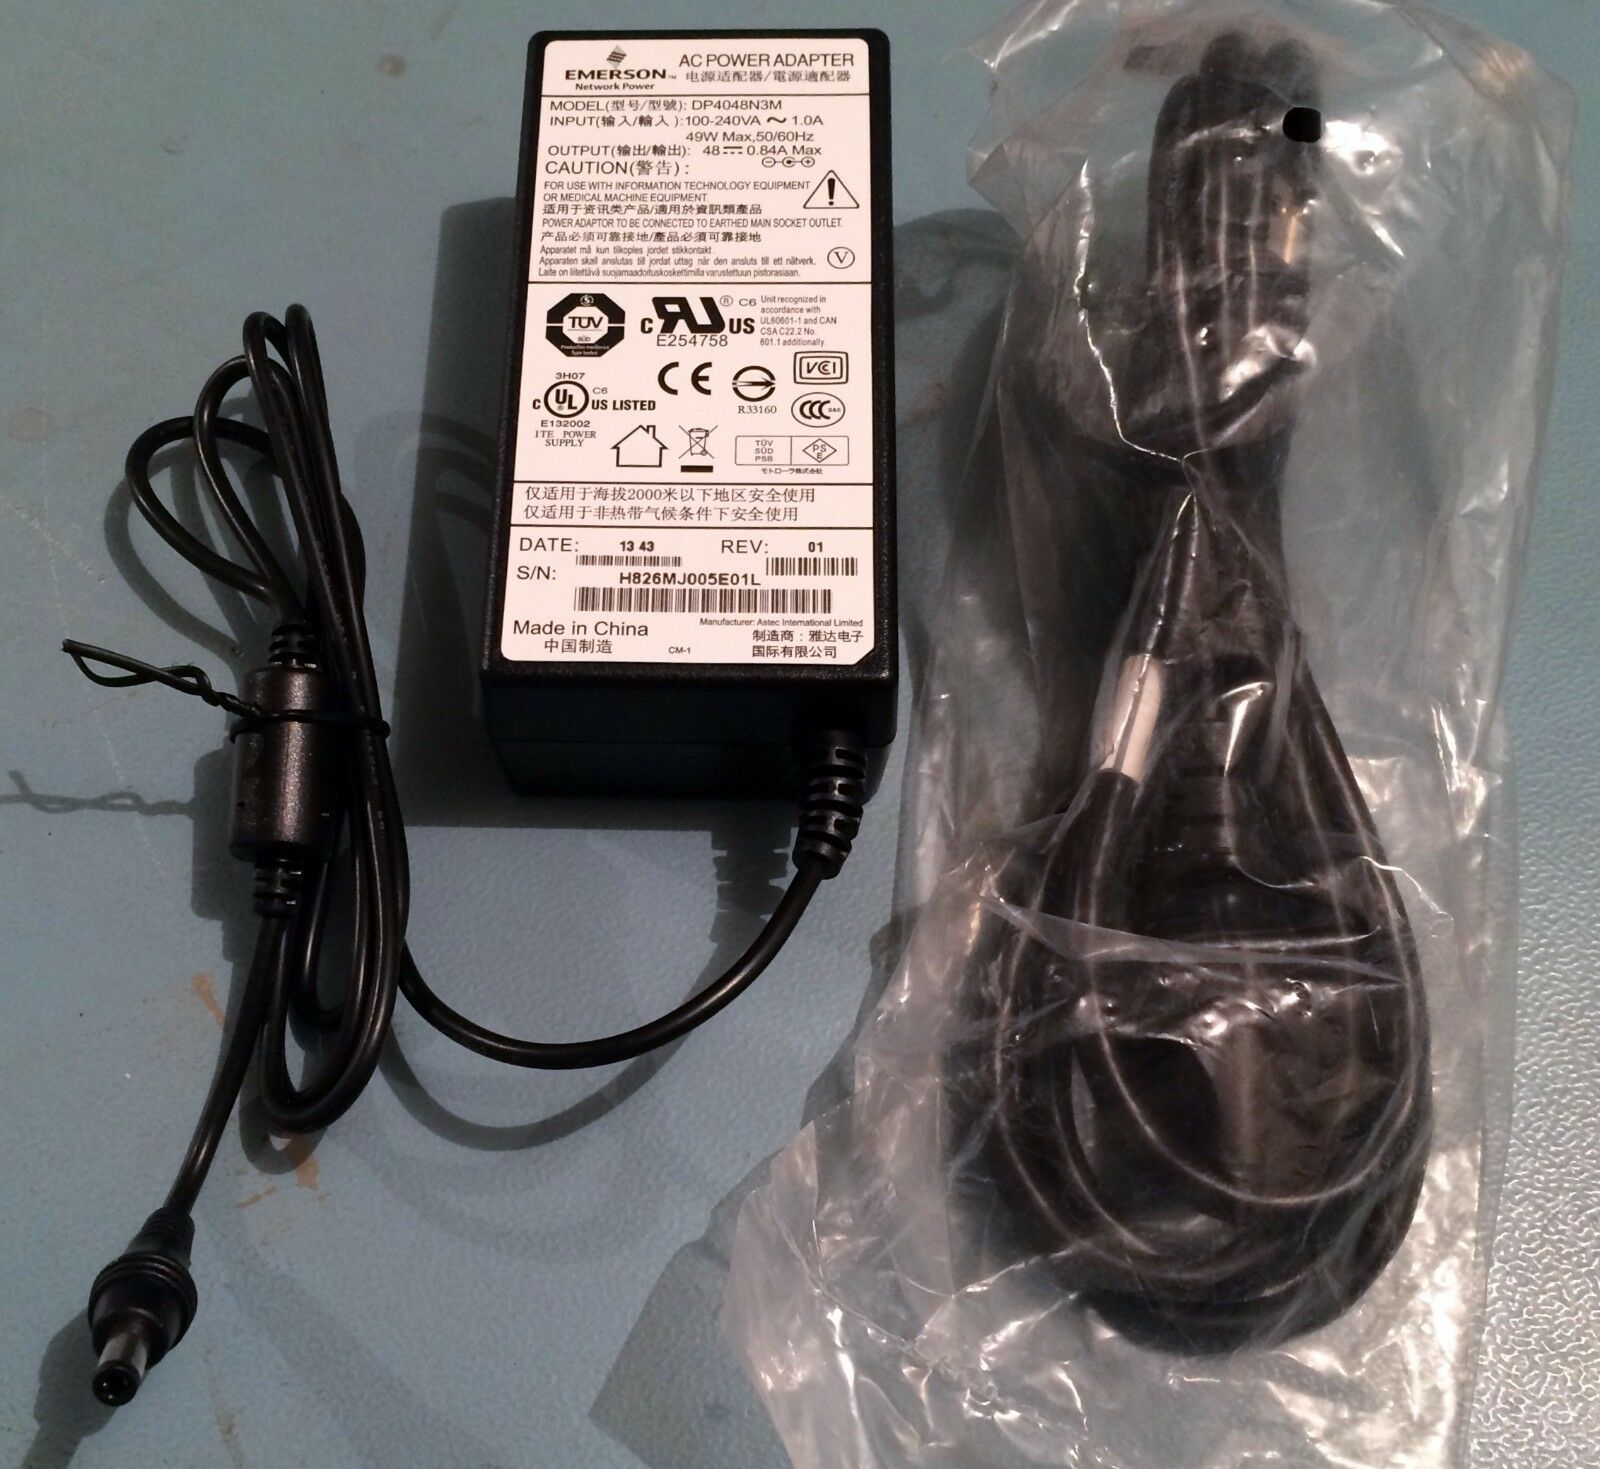 Emerson DP4048N3M AC Adapter Power Supply Cord Cable Charger Digital Genuine Original